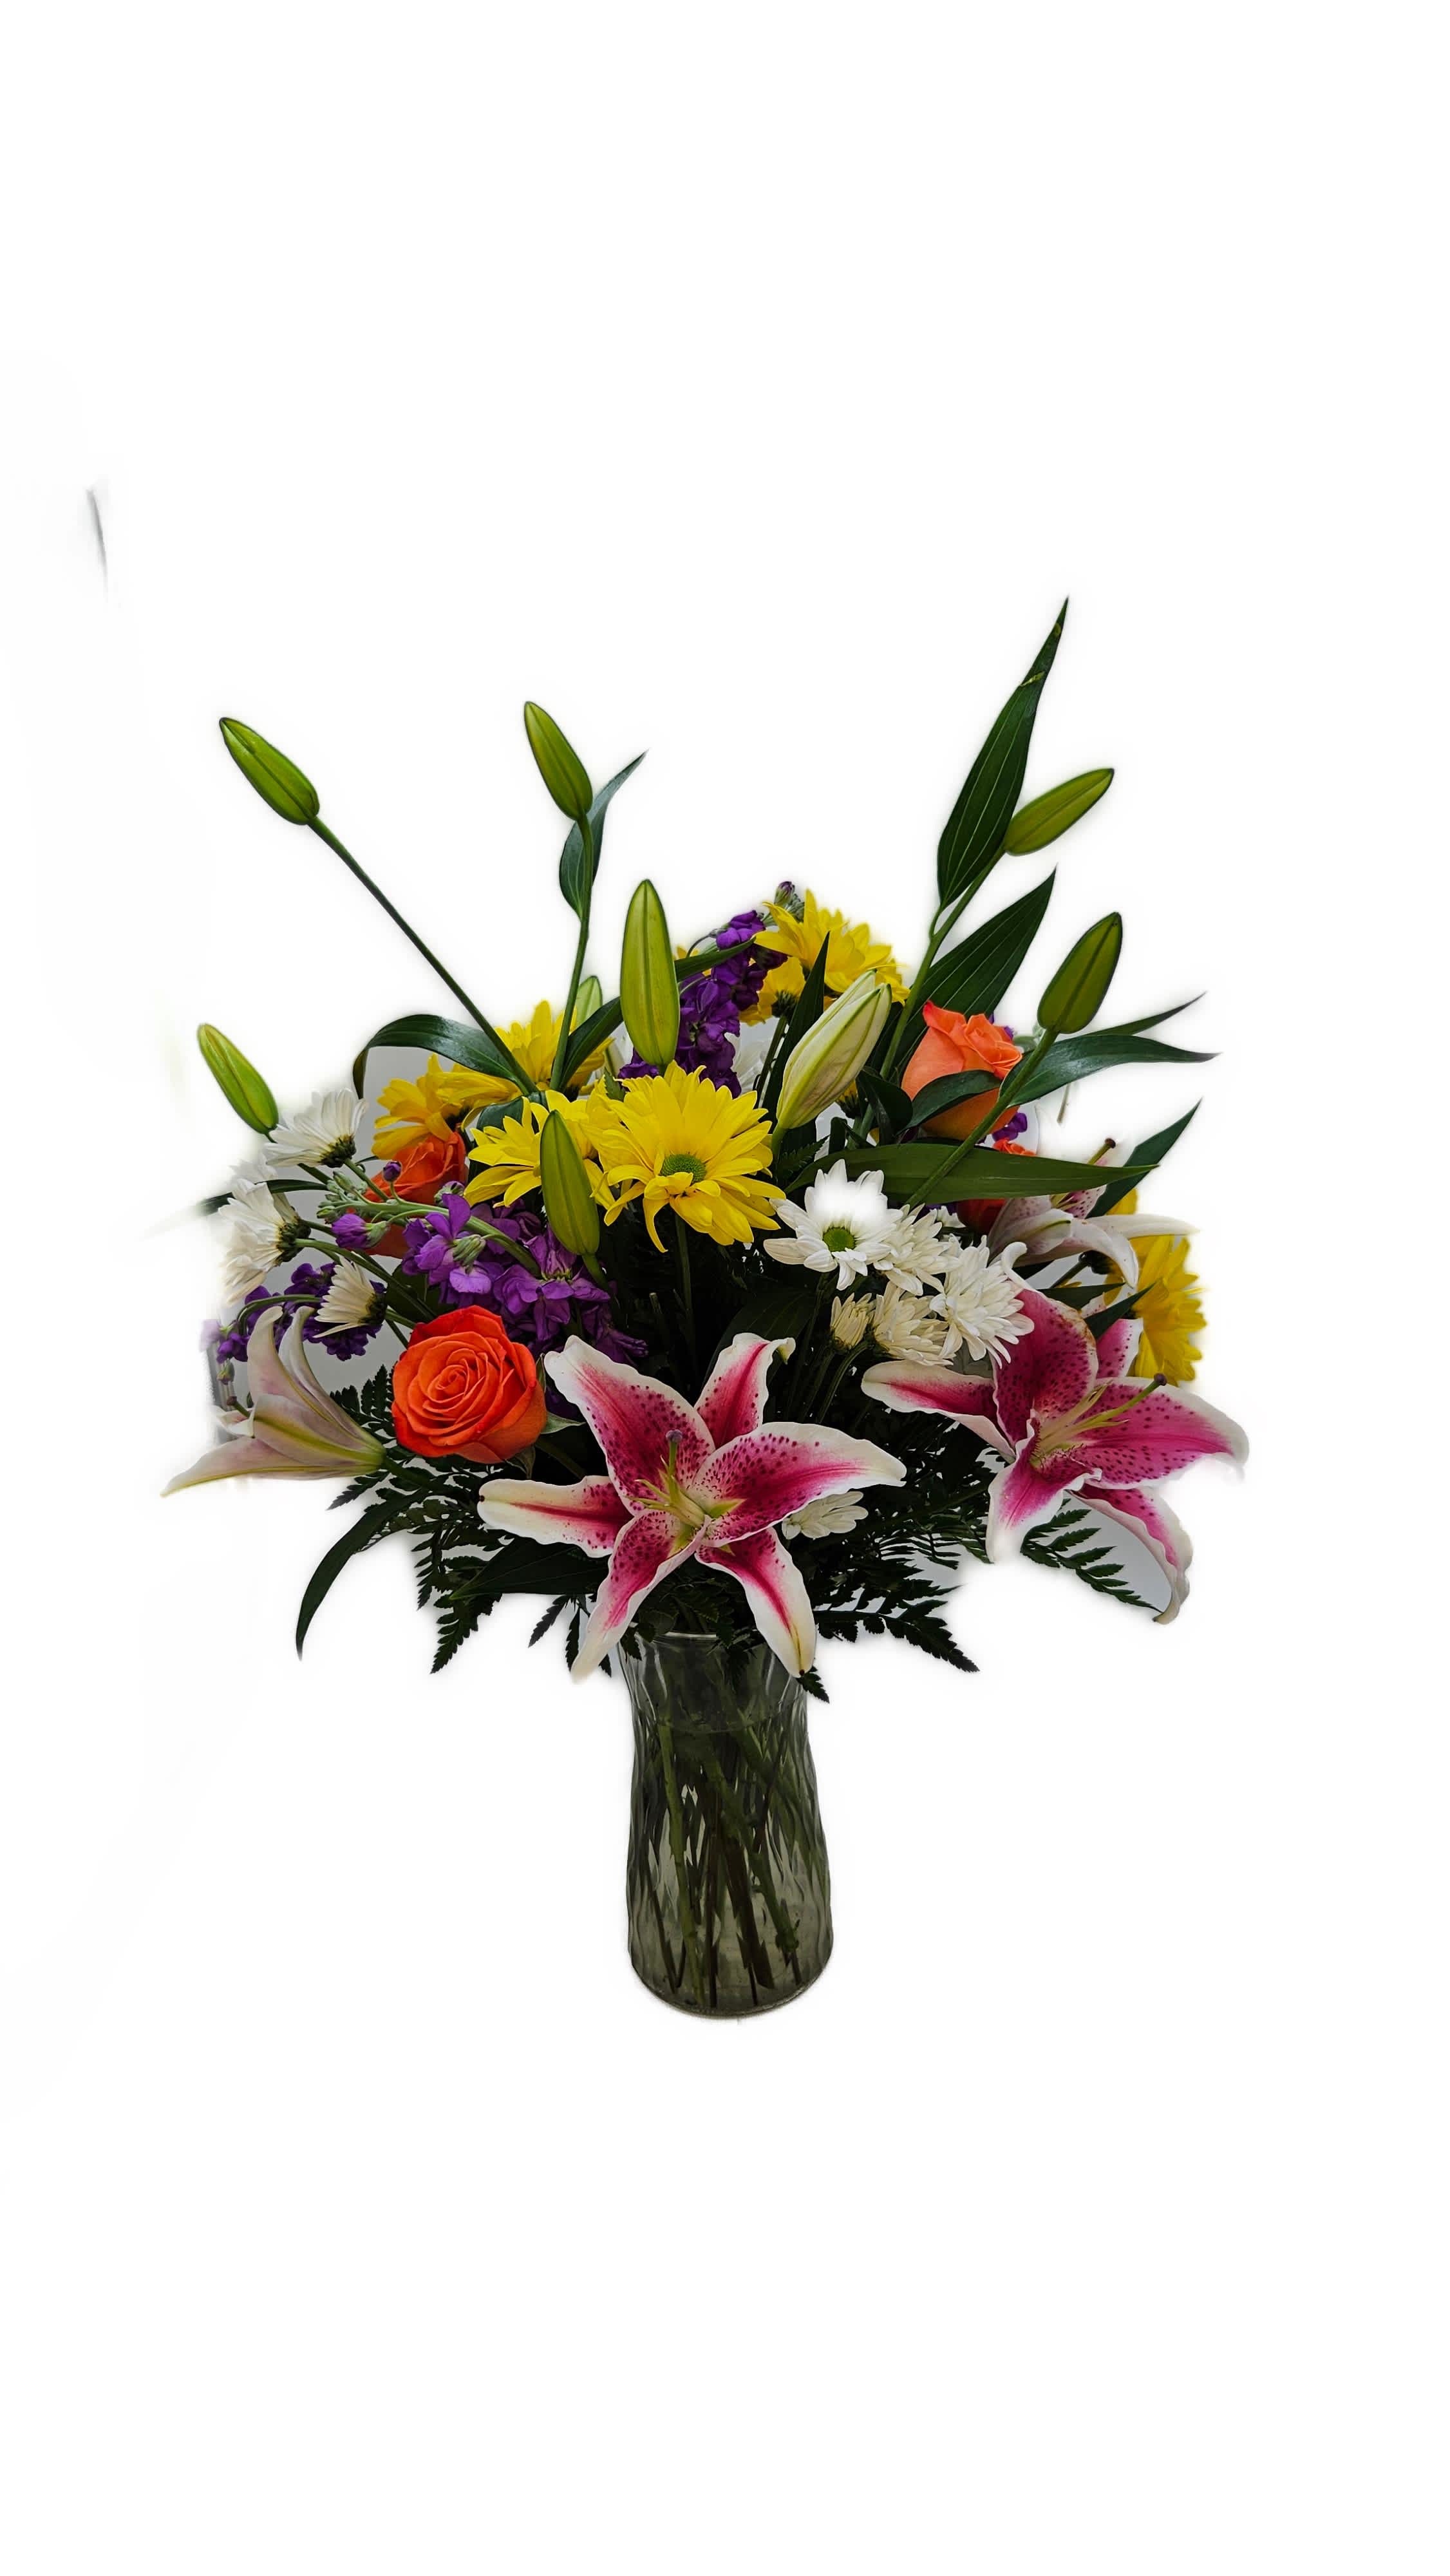 Rainbow Days - Brighten anyones day with this arrangement!  Full of the colors of the rainbow including Stargazer Lilies, Orange Roses, Alstromeria &amp; Daisys accented with purple stock